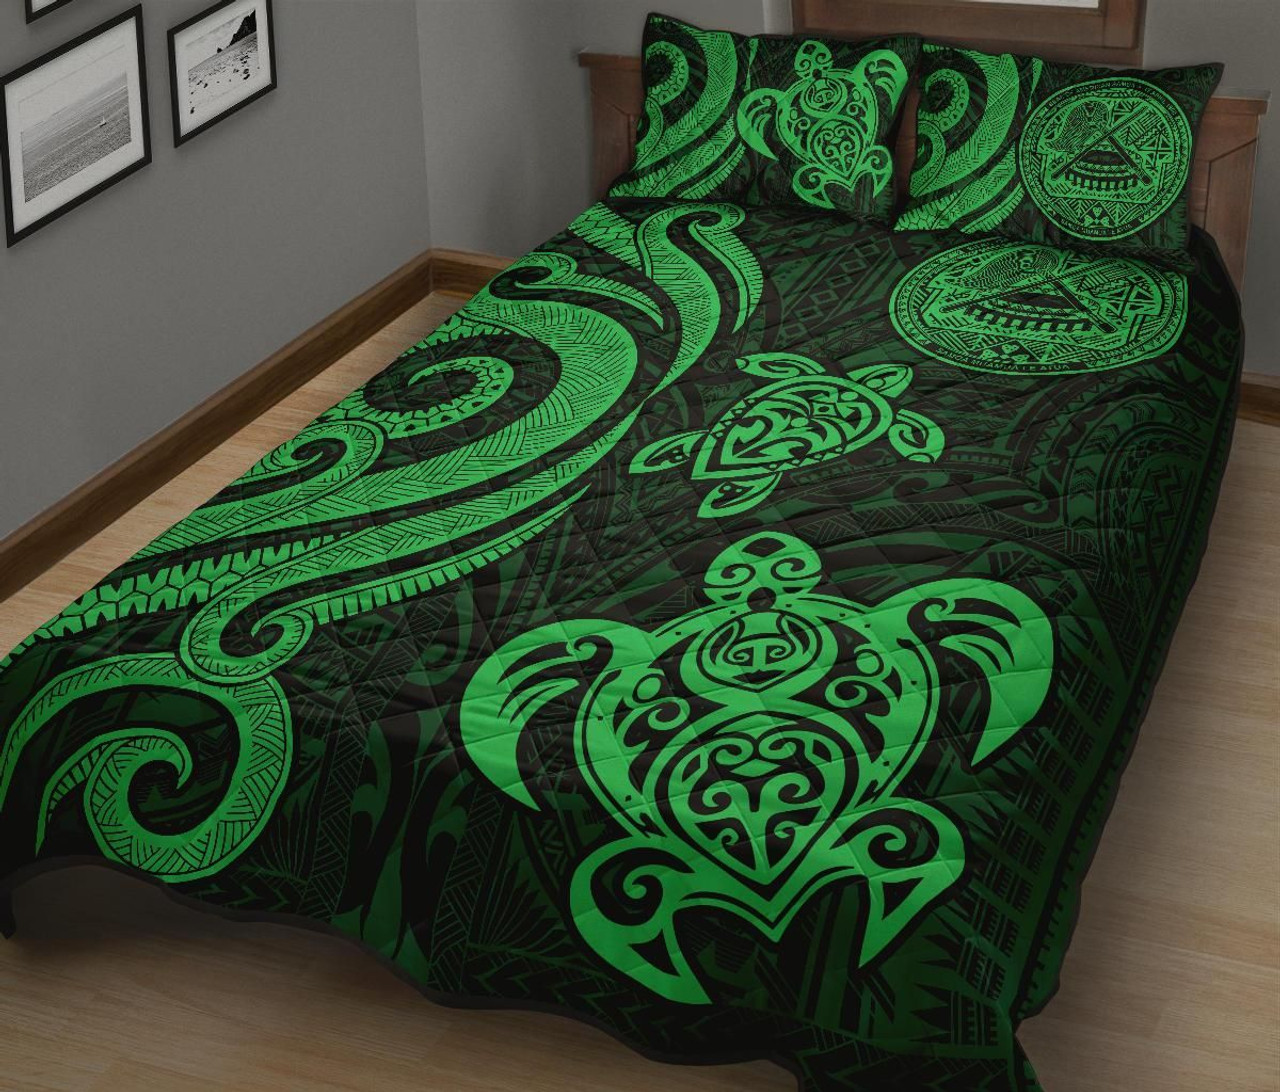 American Samoa Quilt Bed Set - Green Tentacle Turtle 2